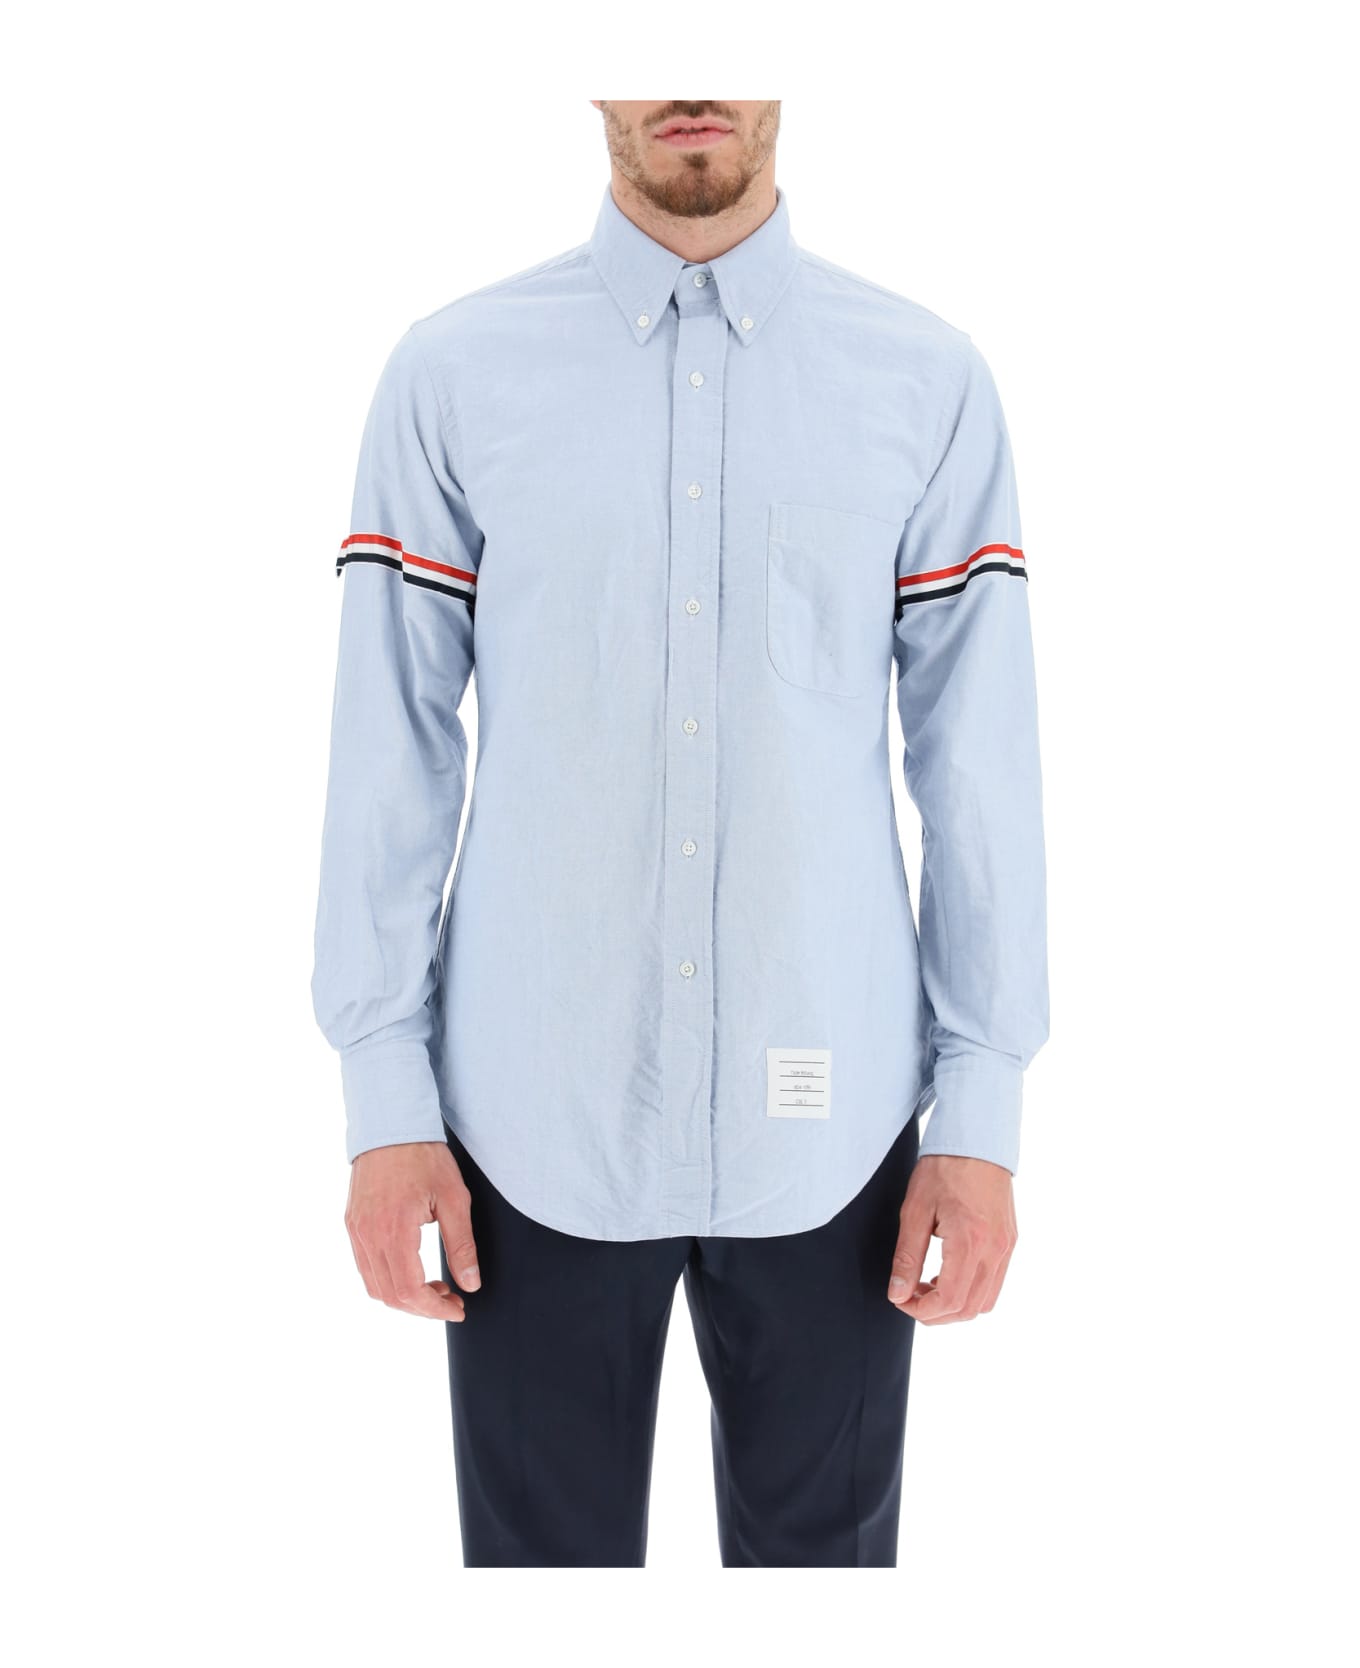 Thom Browne Shirt With Tricolor Ribbon - BLUE